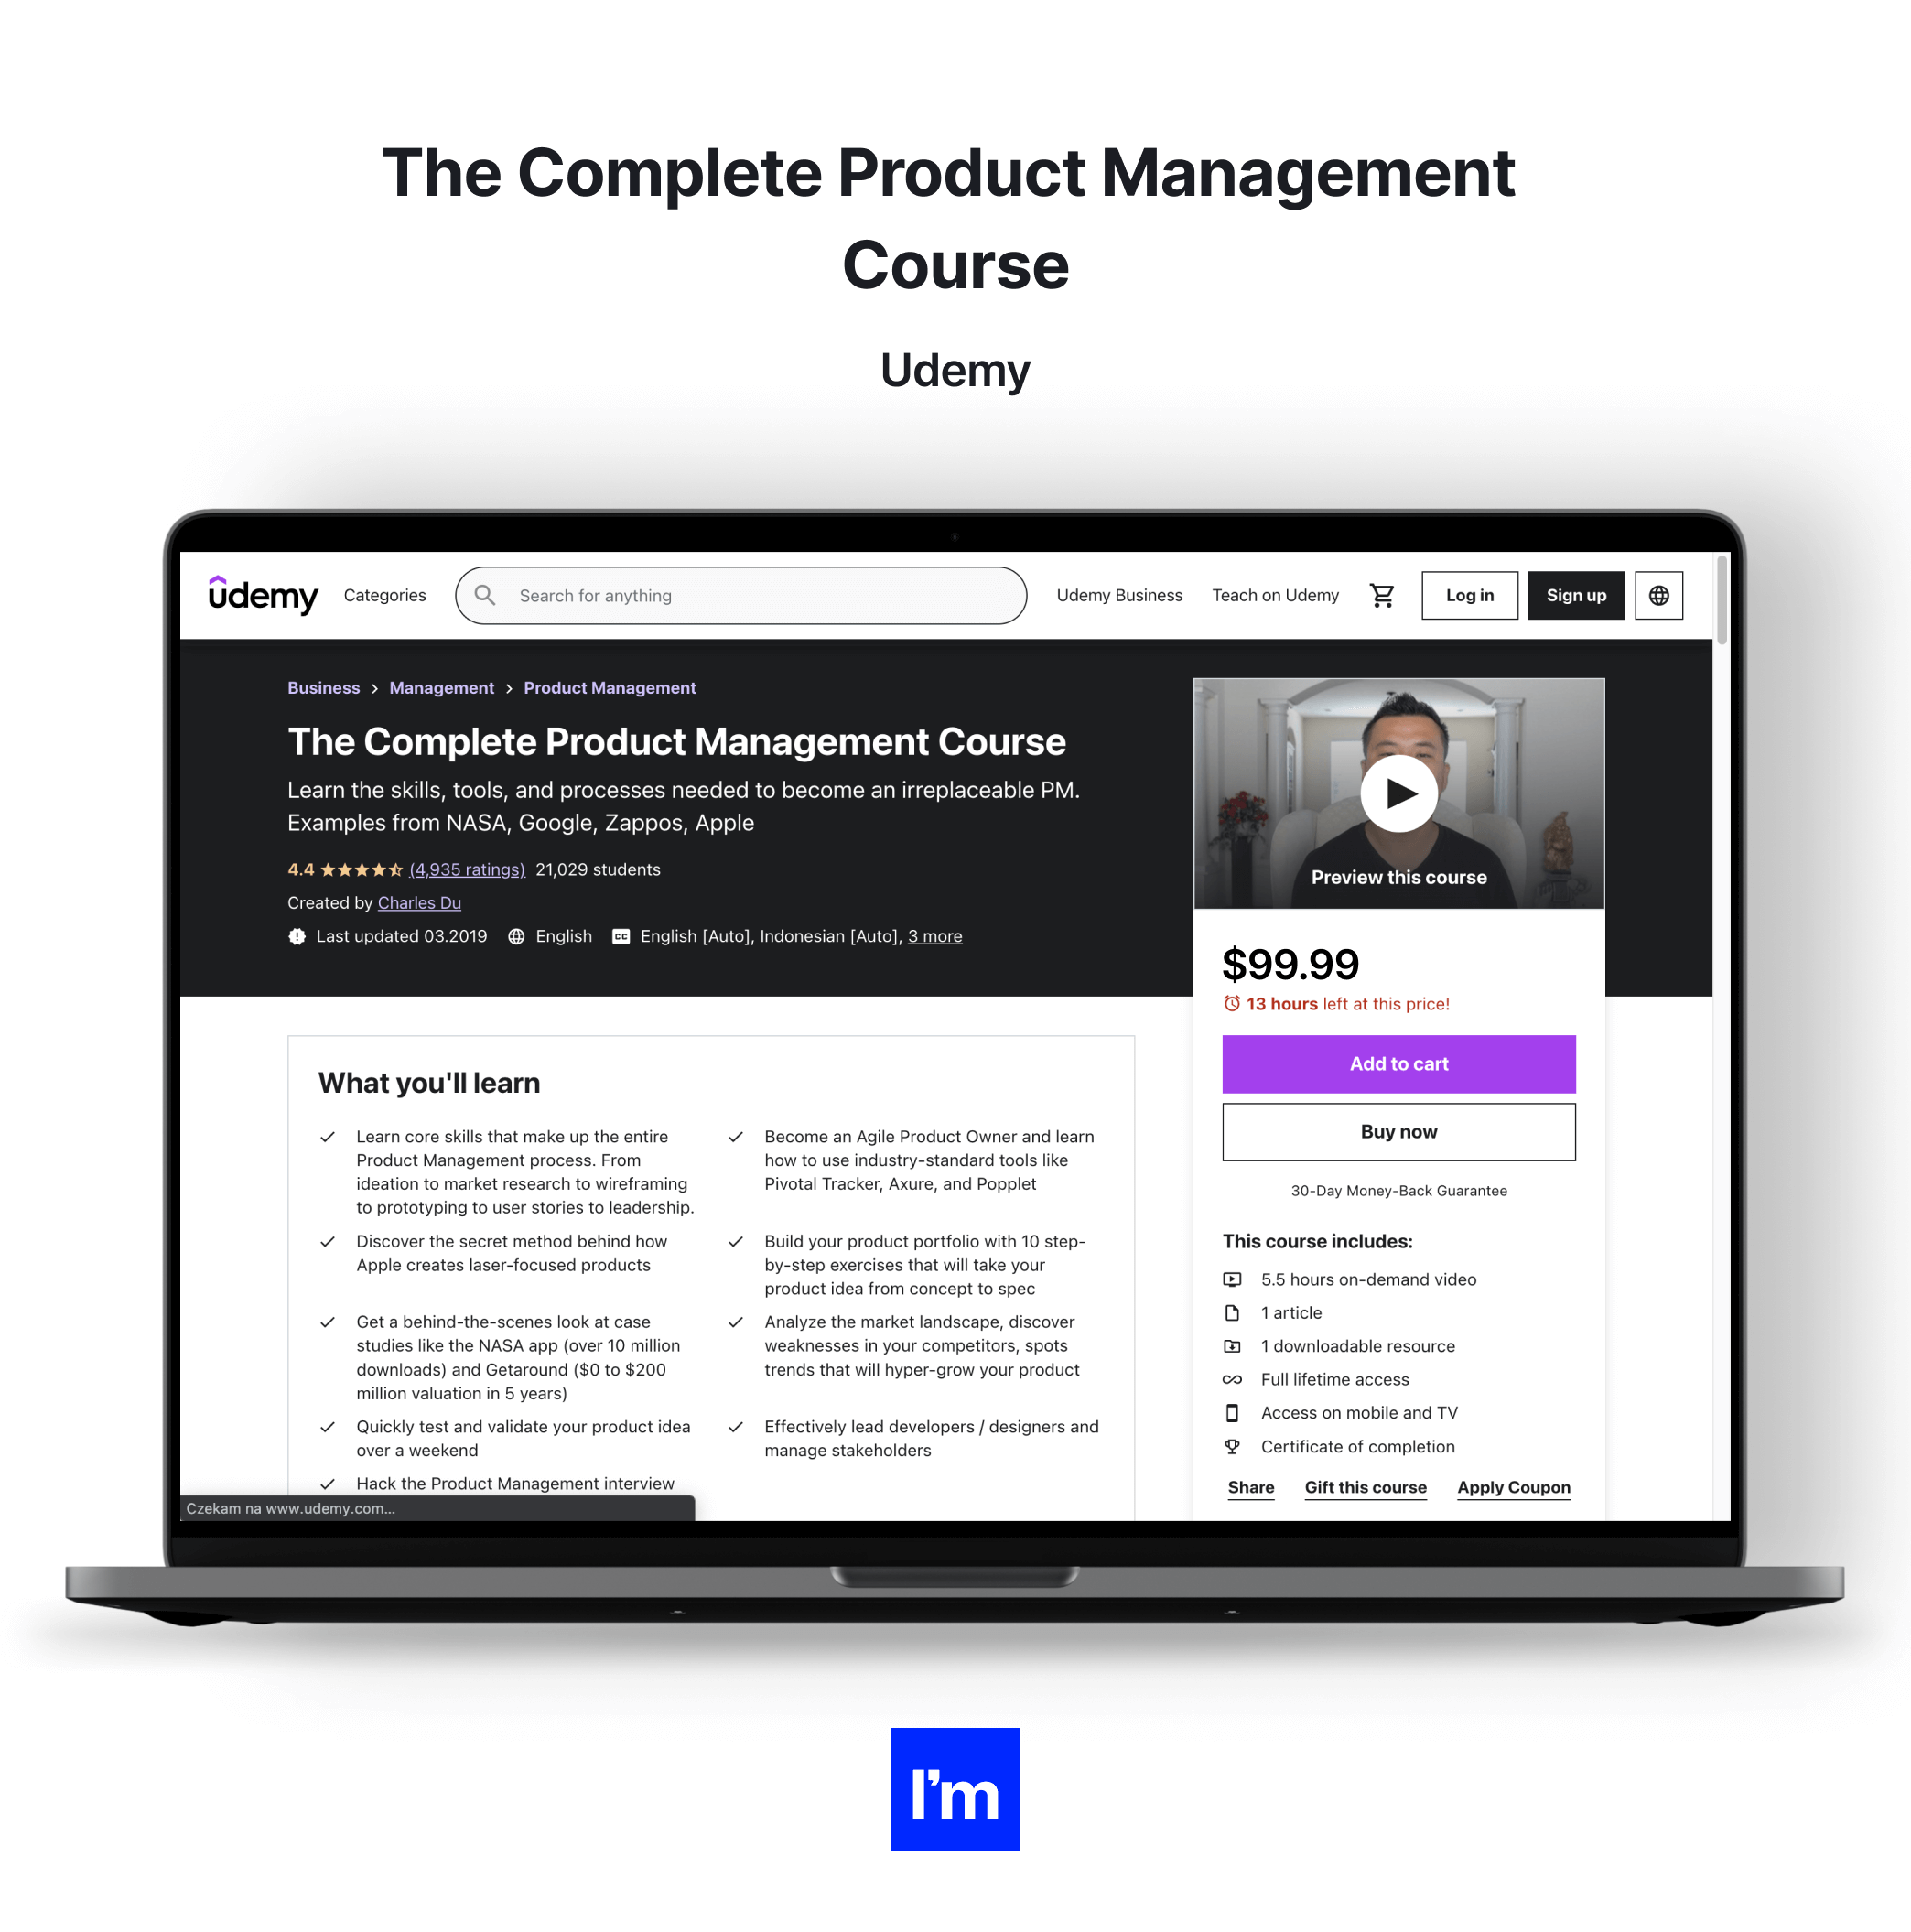 Top 10 Product Management Courses to Polish Your Skills in 2022 - The Complete Product Management Course